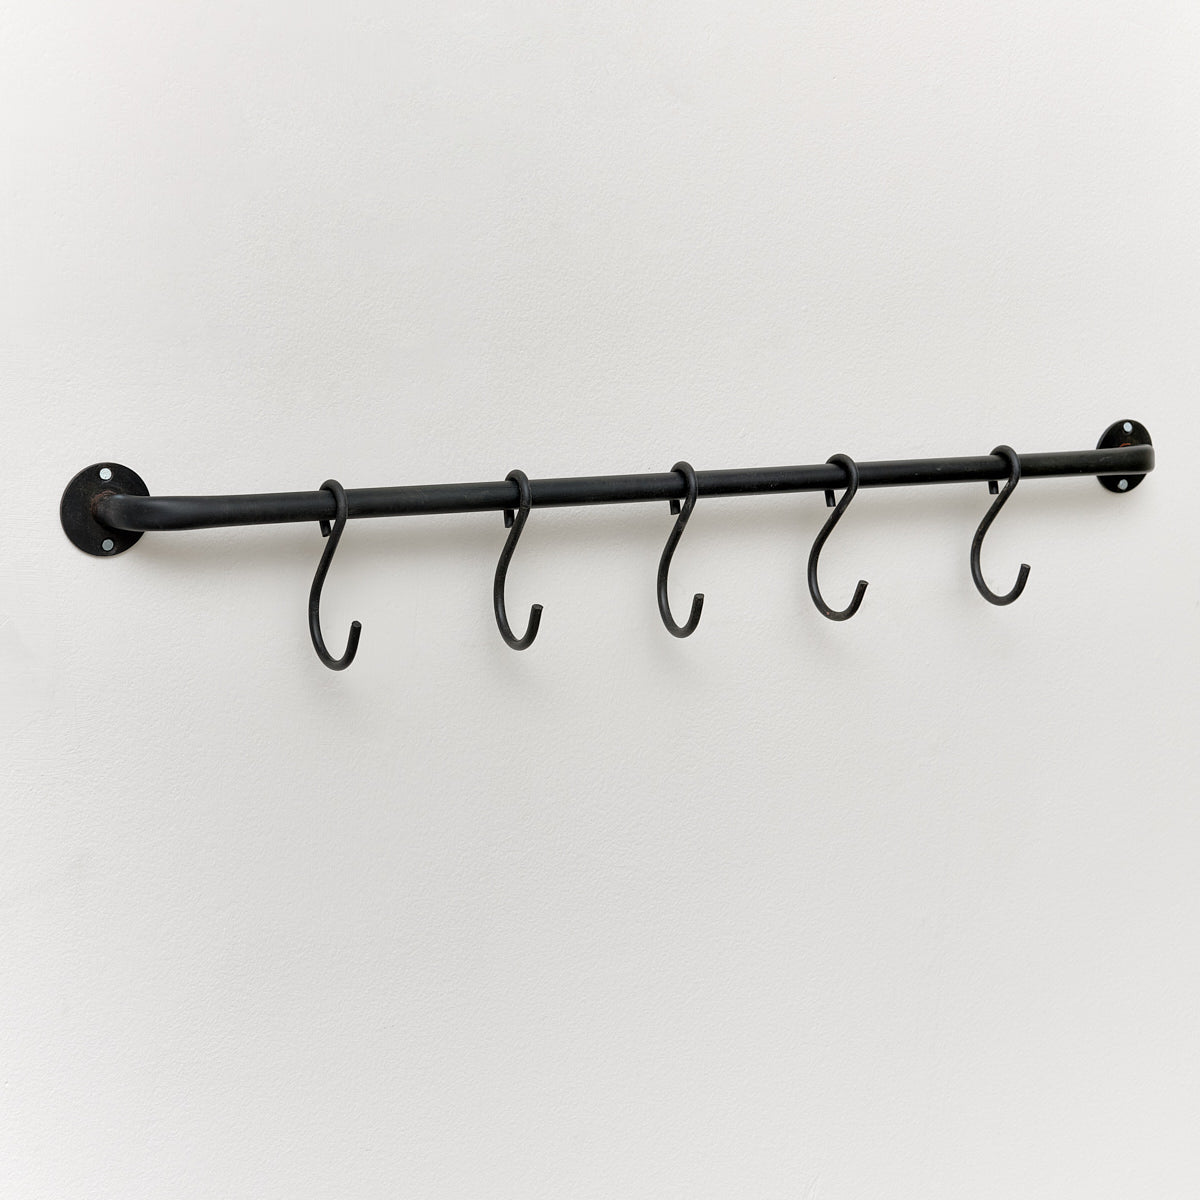 Black Industrial Wall Mounted Rail with 5 Storage Hooks